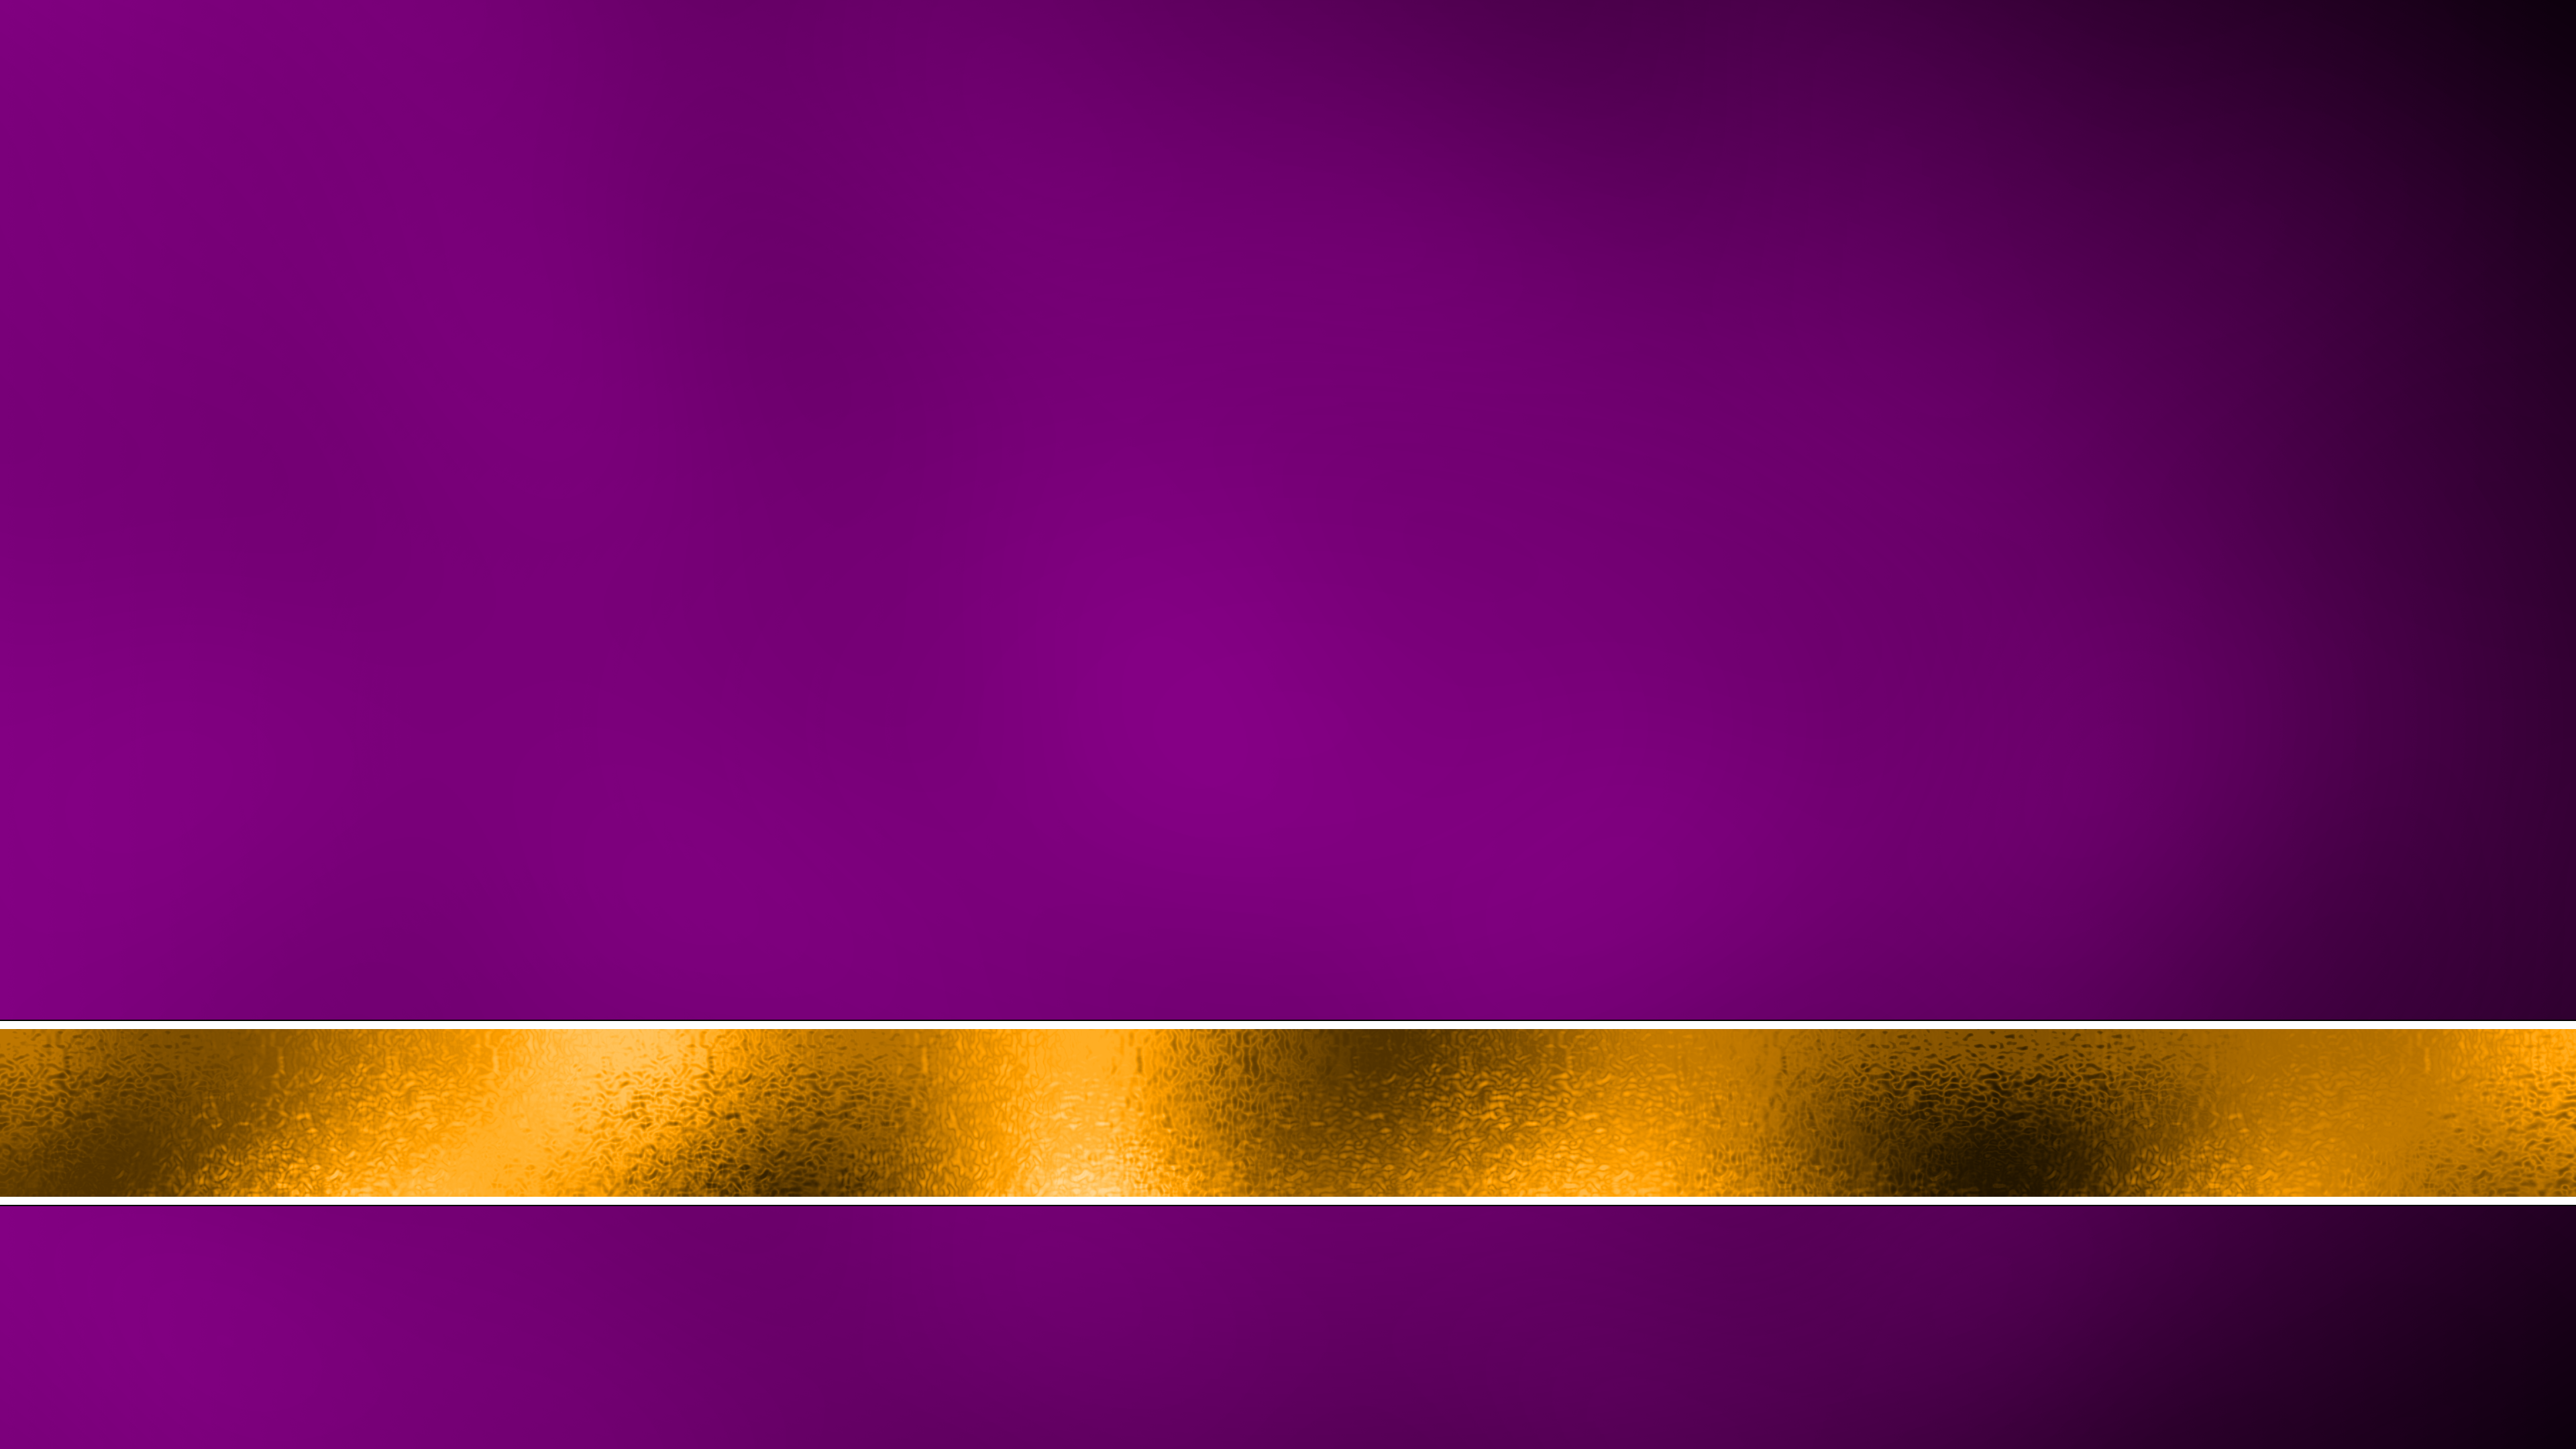 Purple and Gold 4k Wallpaper by SirLavaH on DeviantArt